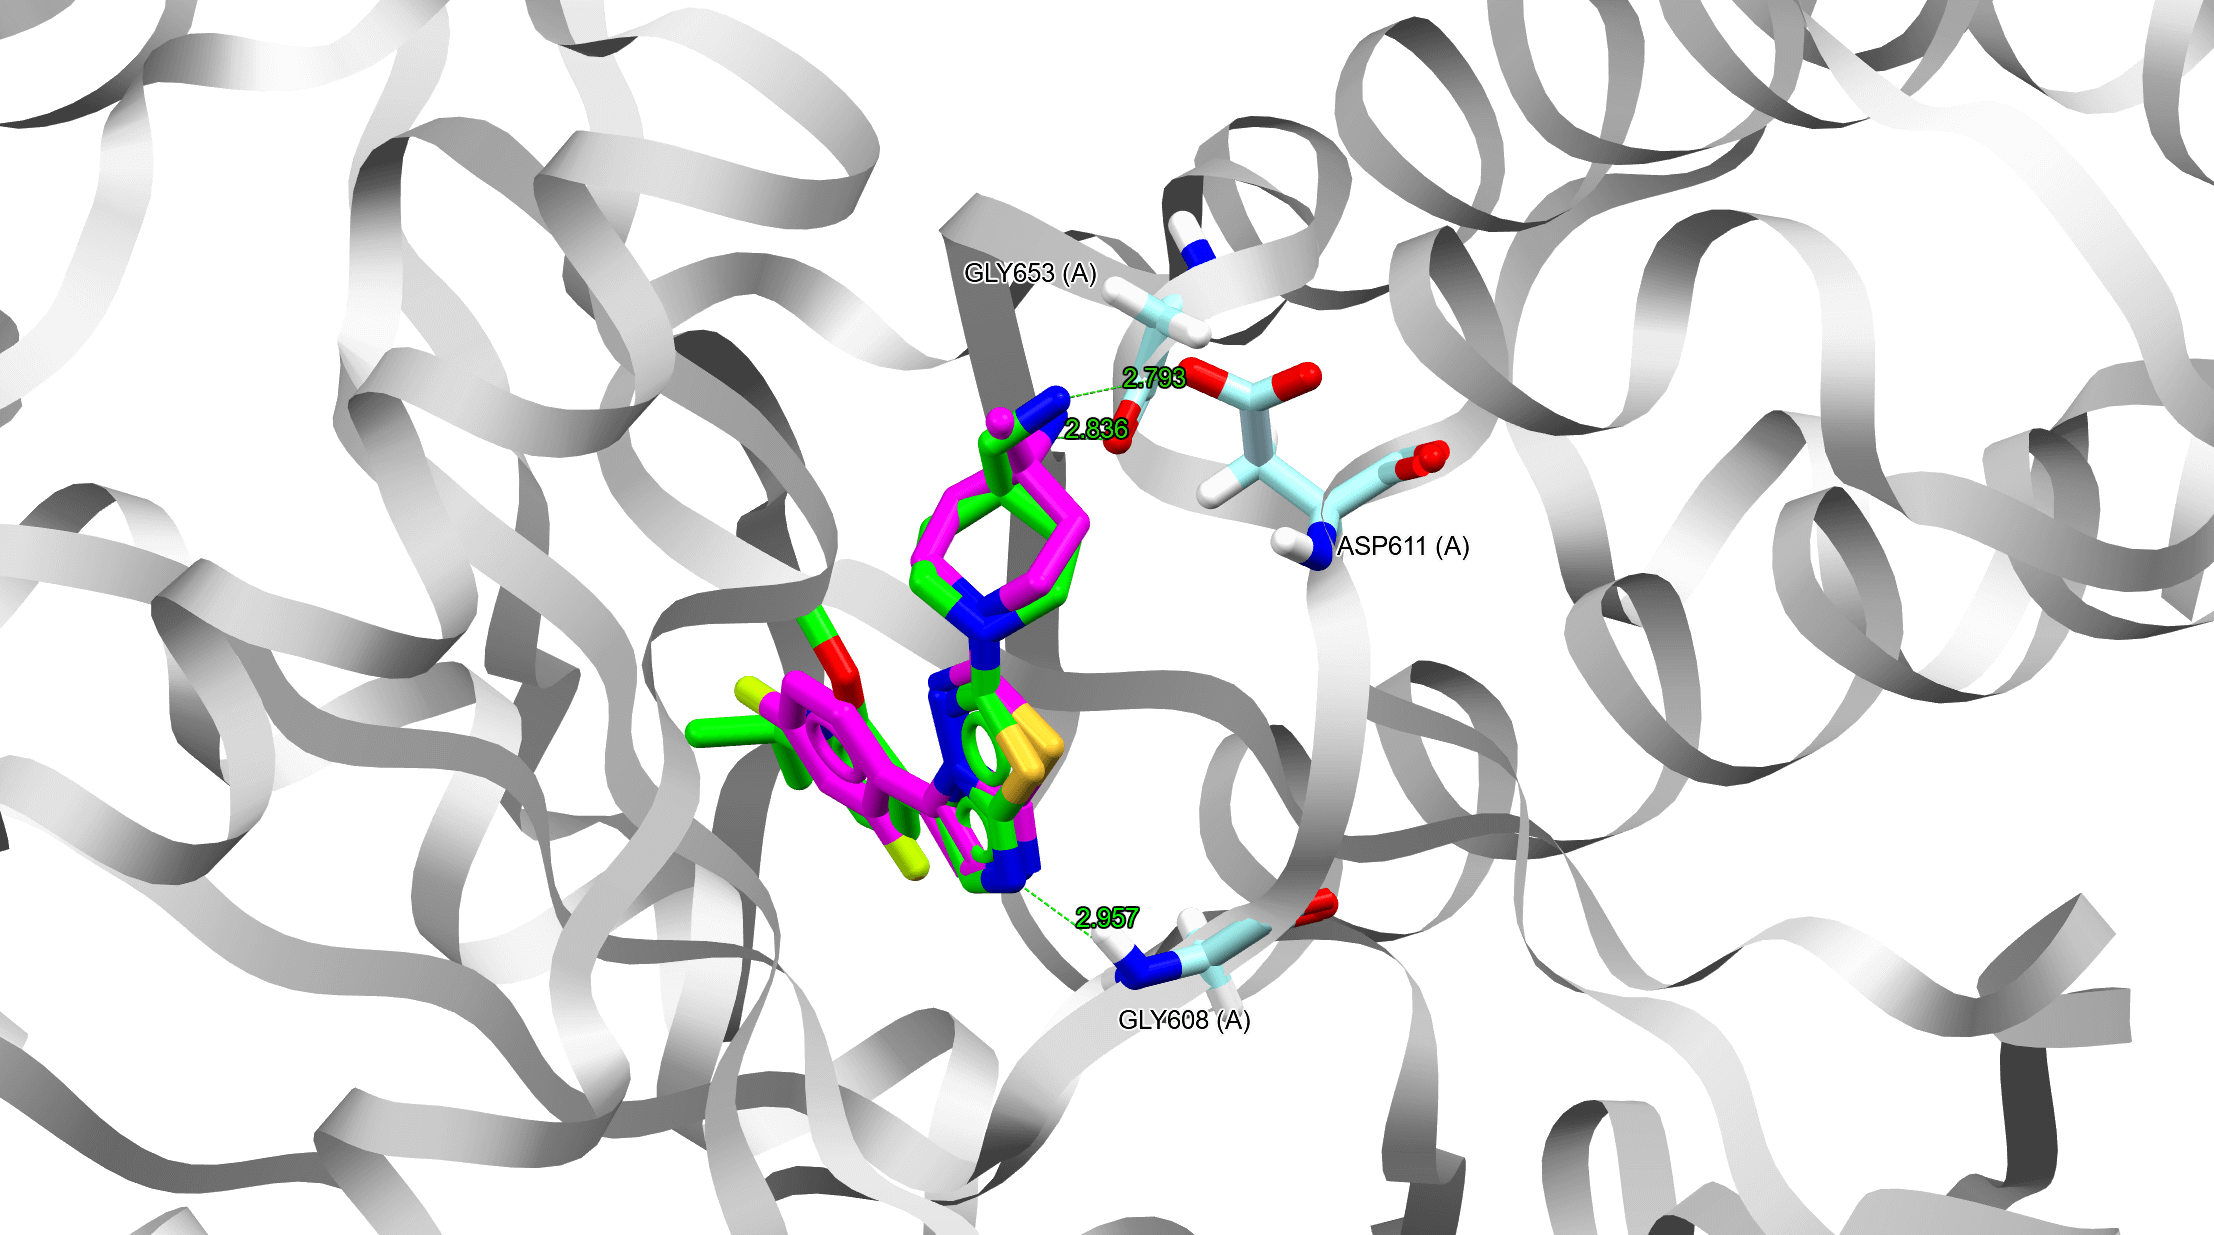 A protein displayed as a ribbon with its binding site represented in capped sticks style, representing an example of GOLD protein-ligand docking.